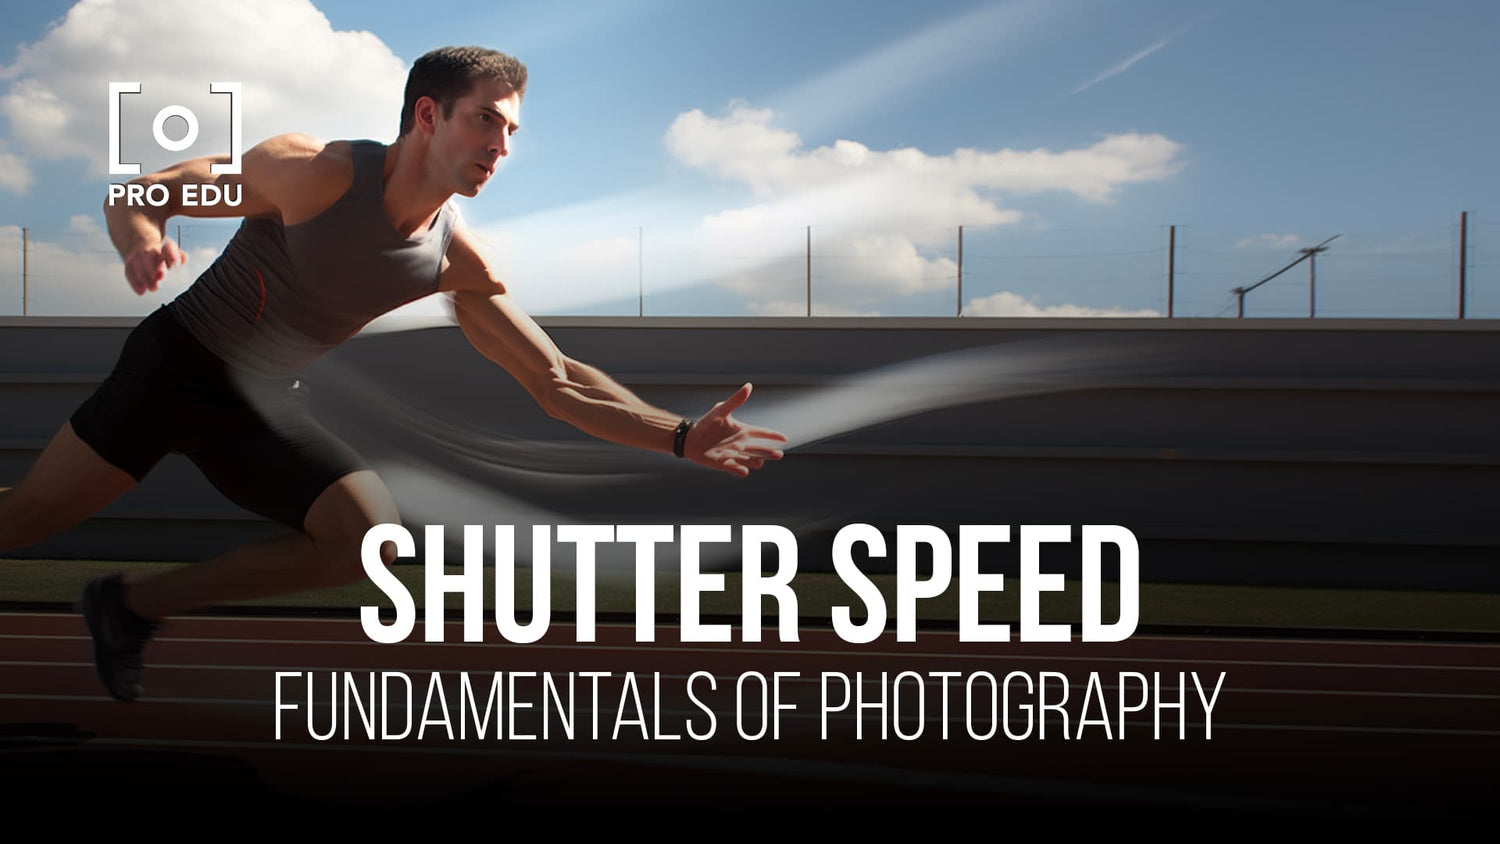 Controlling motion and light with shutter speed explained for photographers